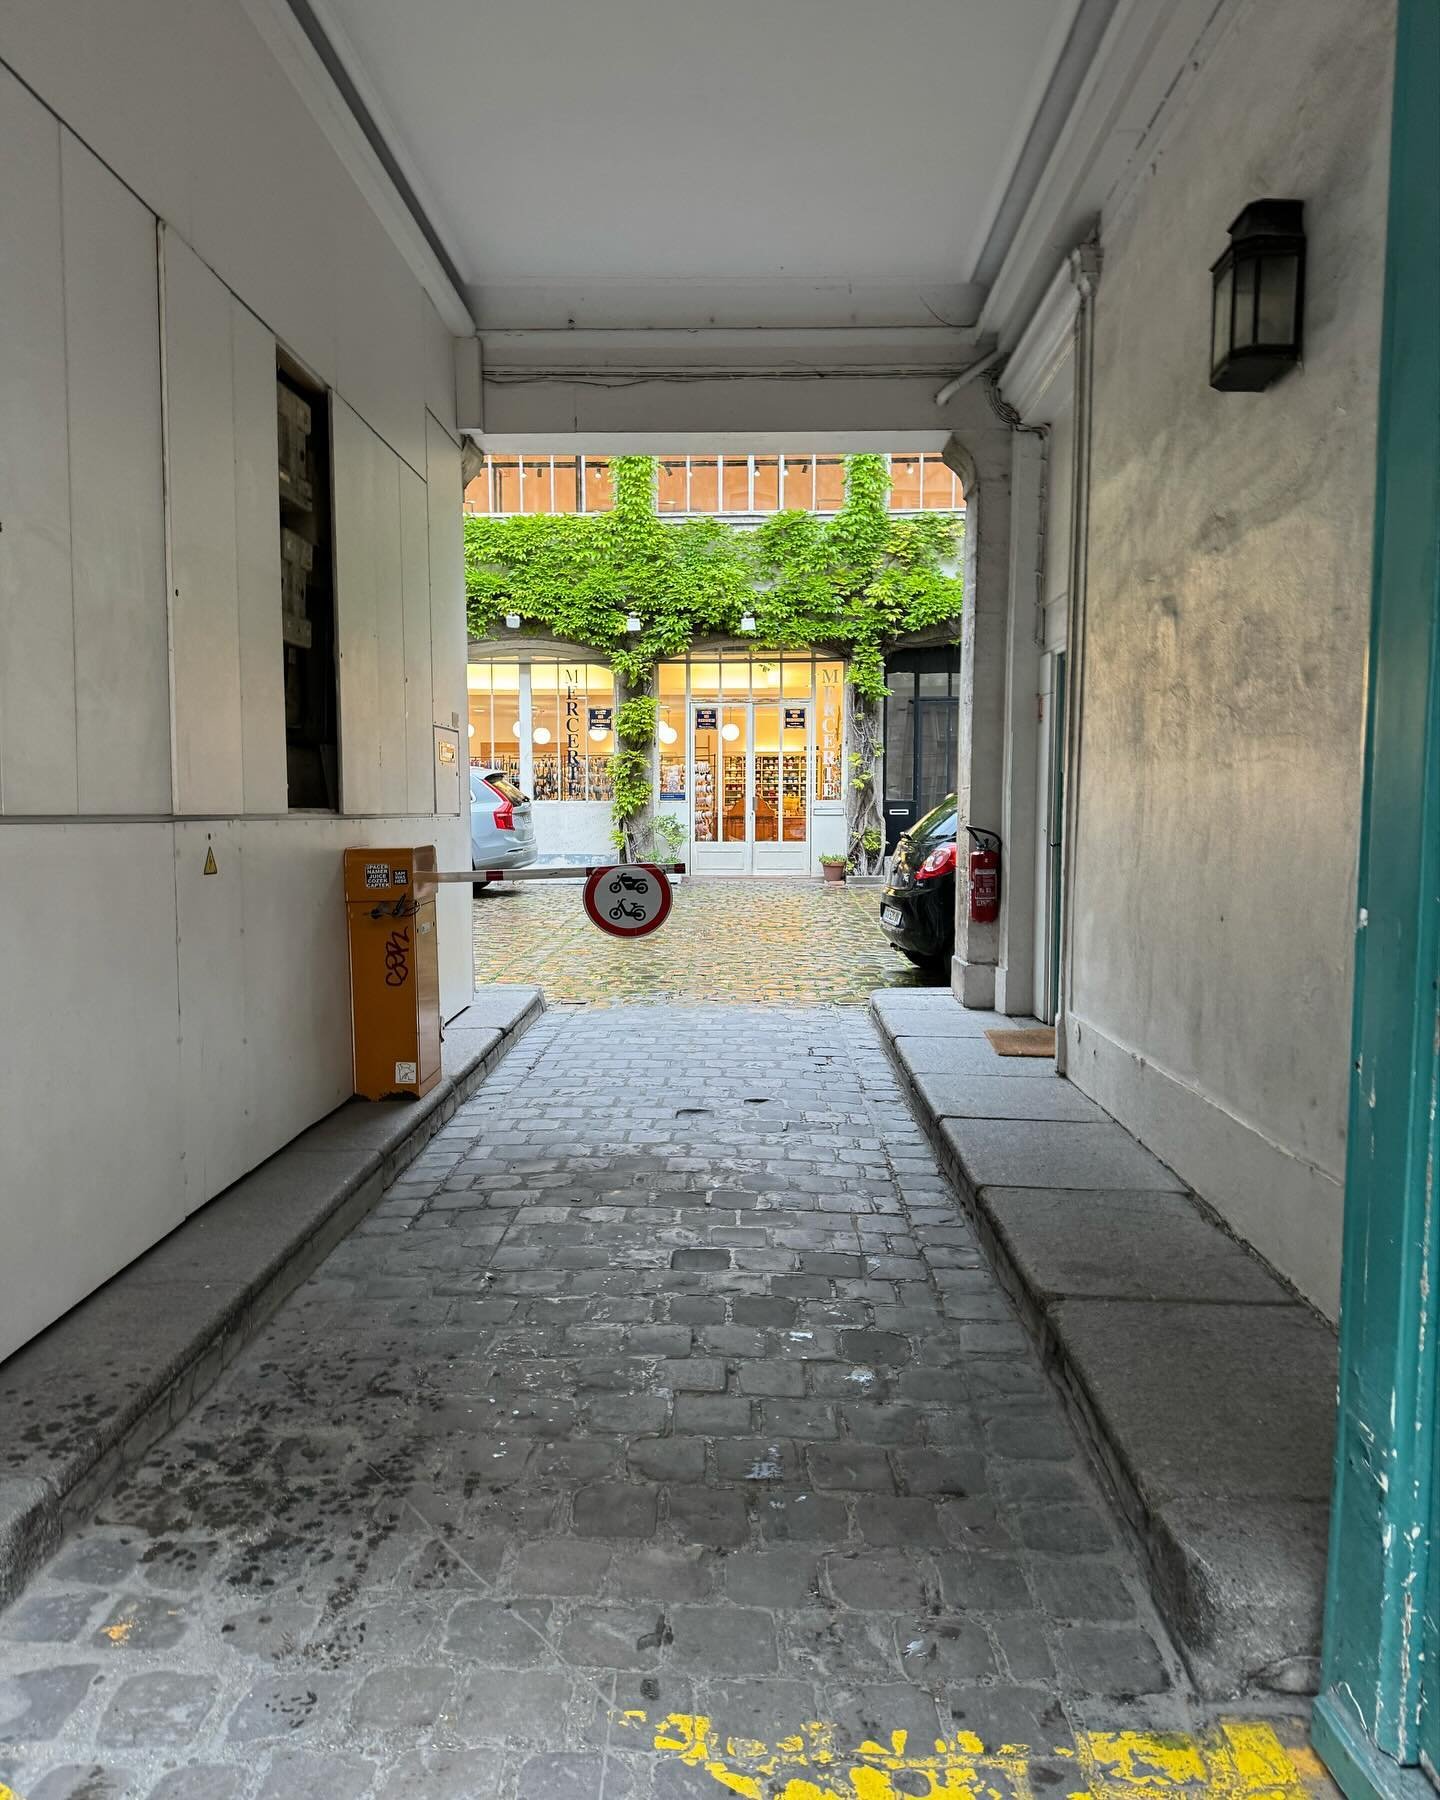 Paris is full of secret courtyards and tiny side streets and it&rsquo;s been my mission to find them all! 

If you&rsquo;d like to learn more about the week long guided tour happening this fall, join me for a 30 min zoom this Sunday, May 5, where I&r